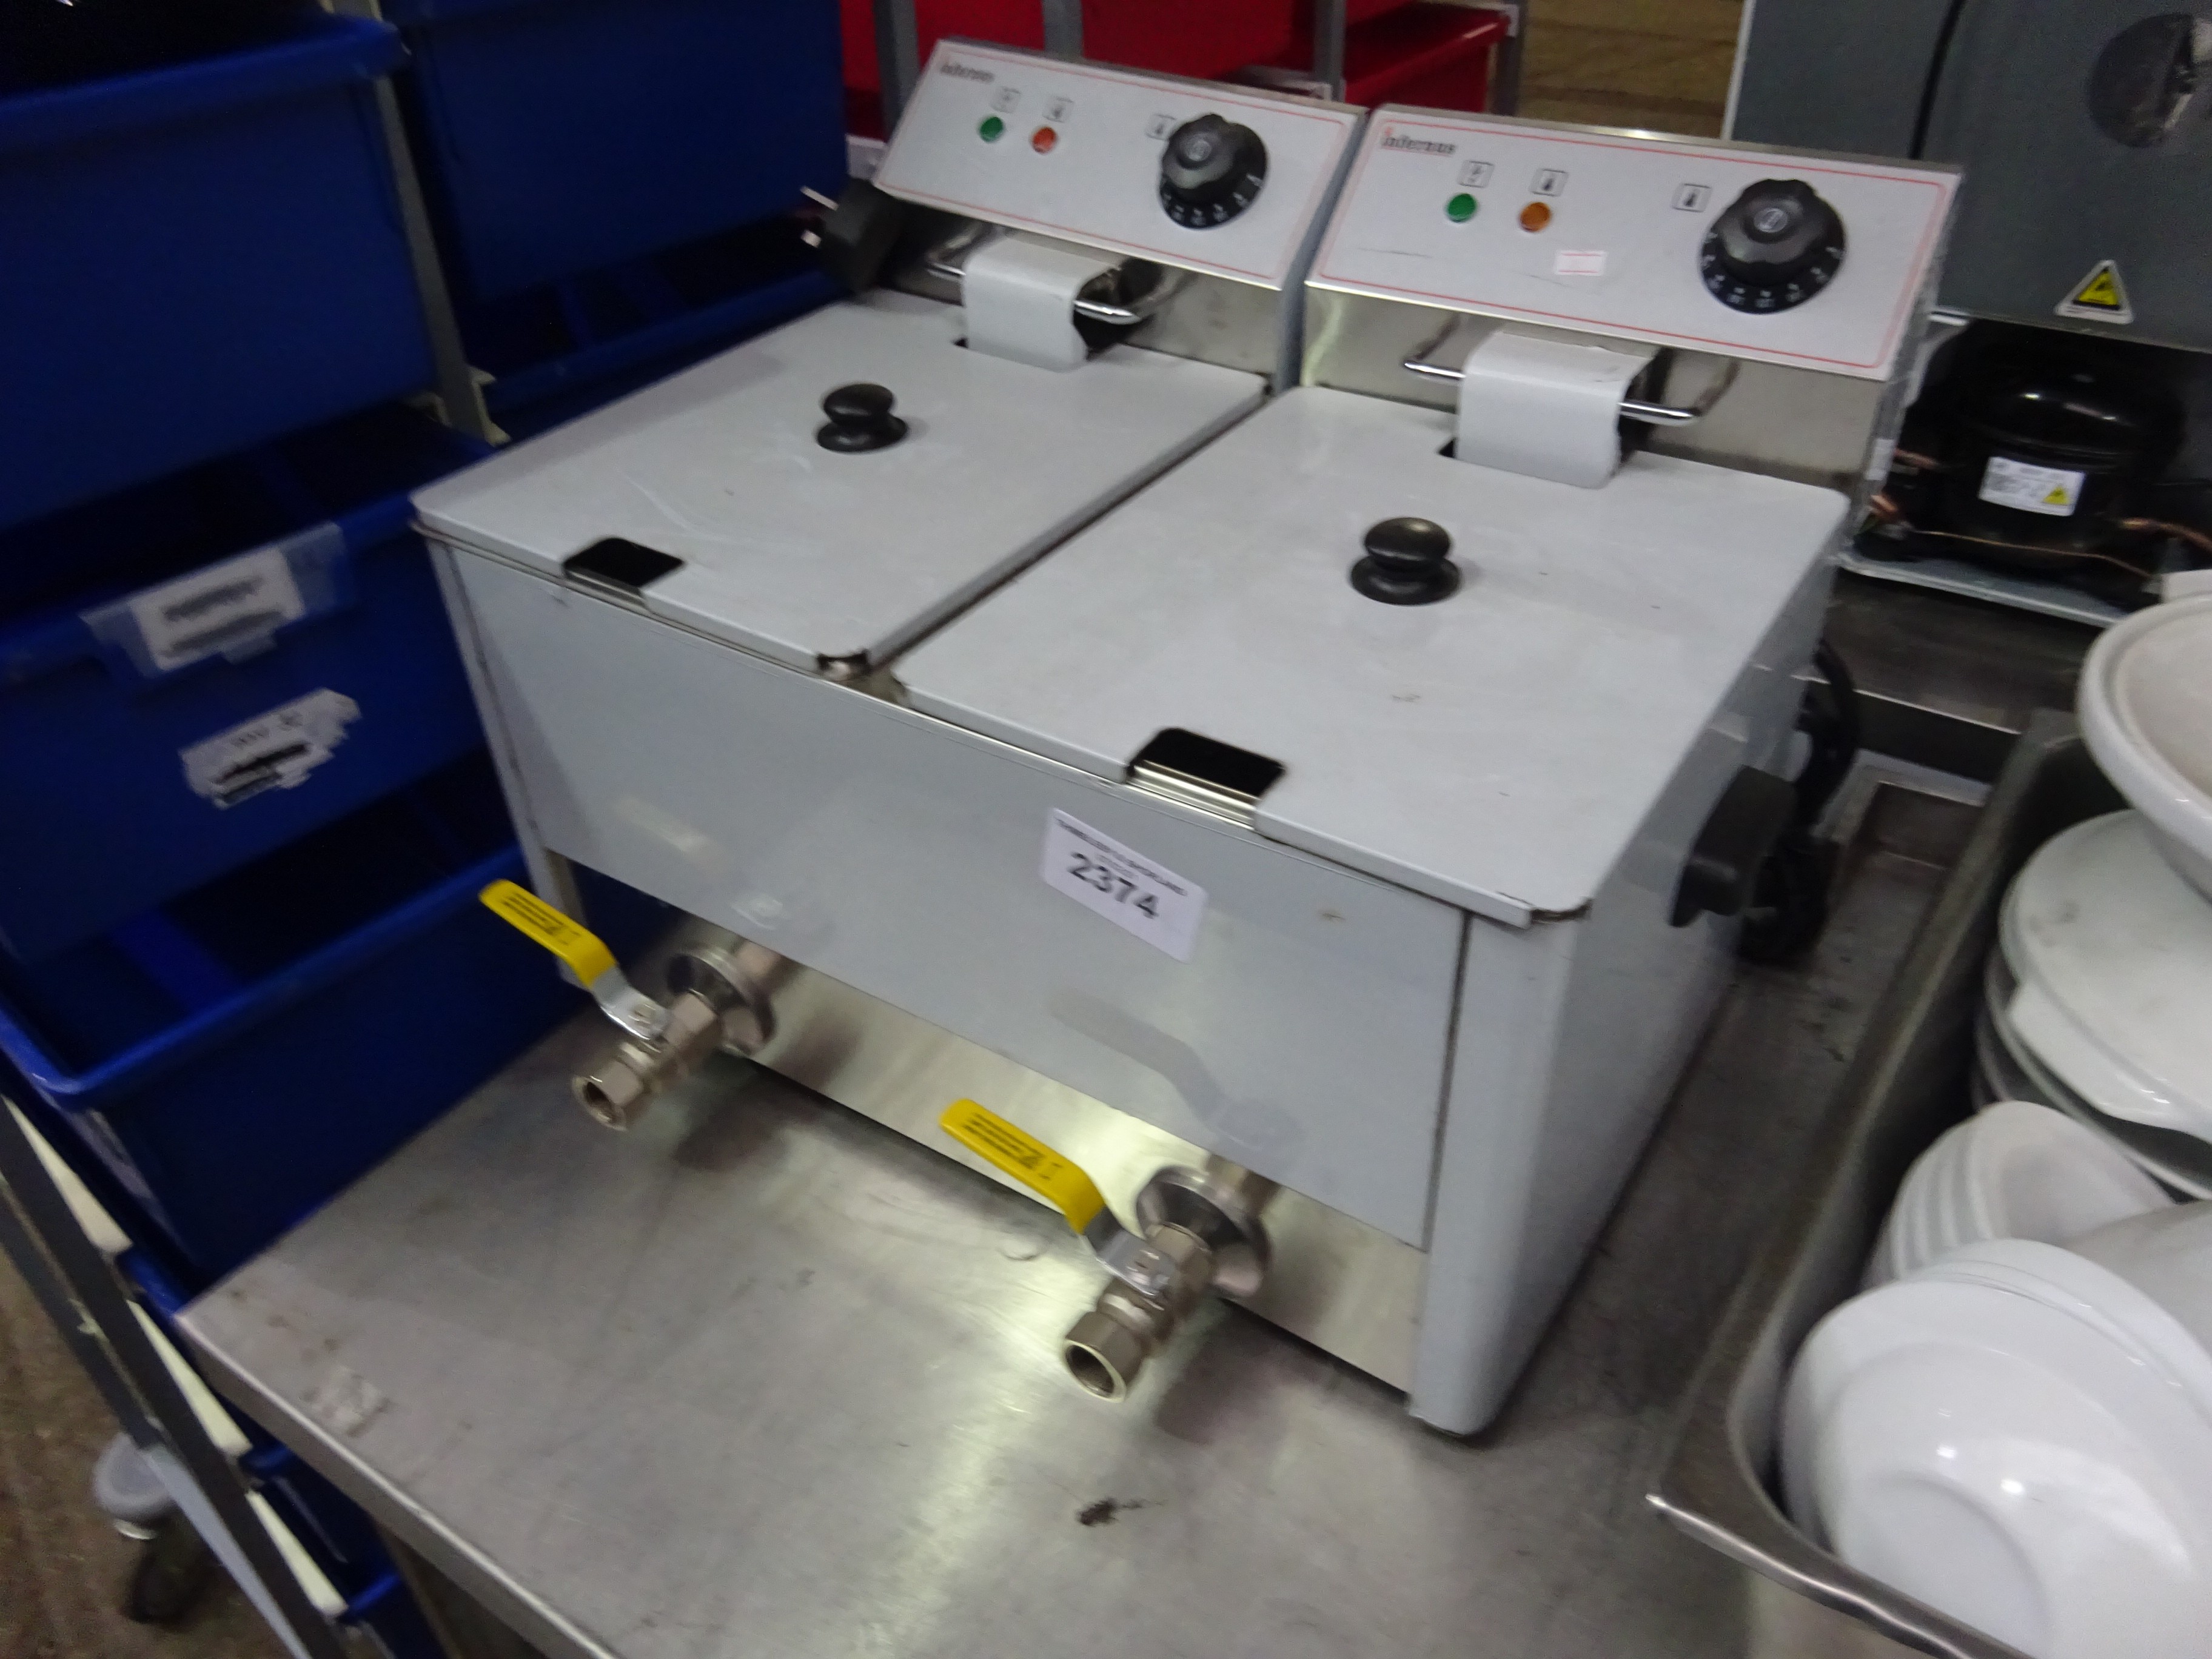 Infernus double table top fryer with front drain.